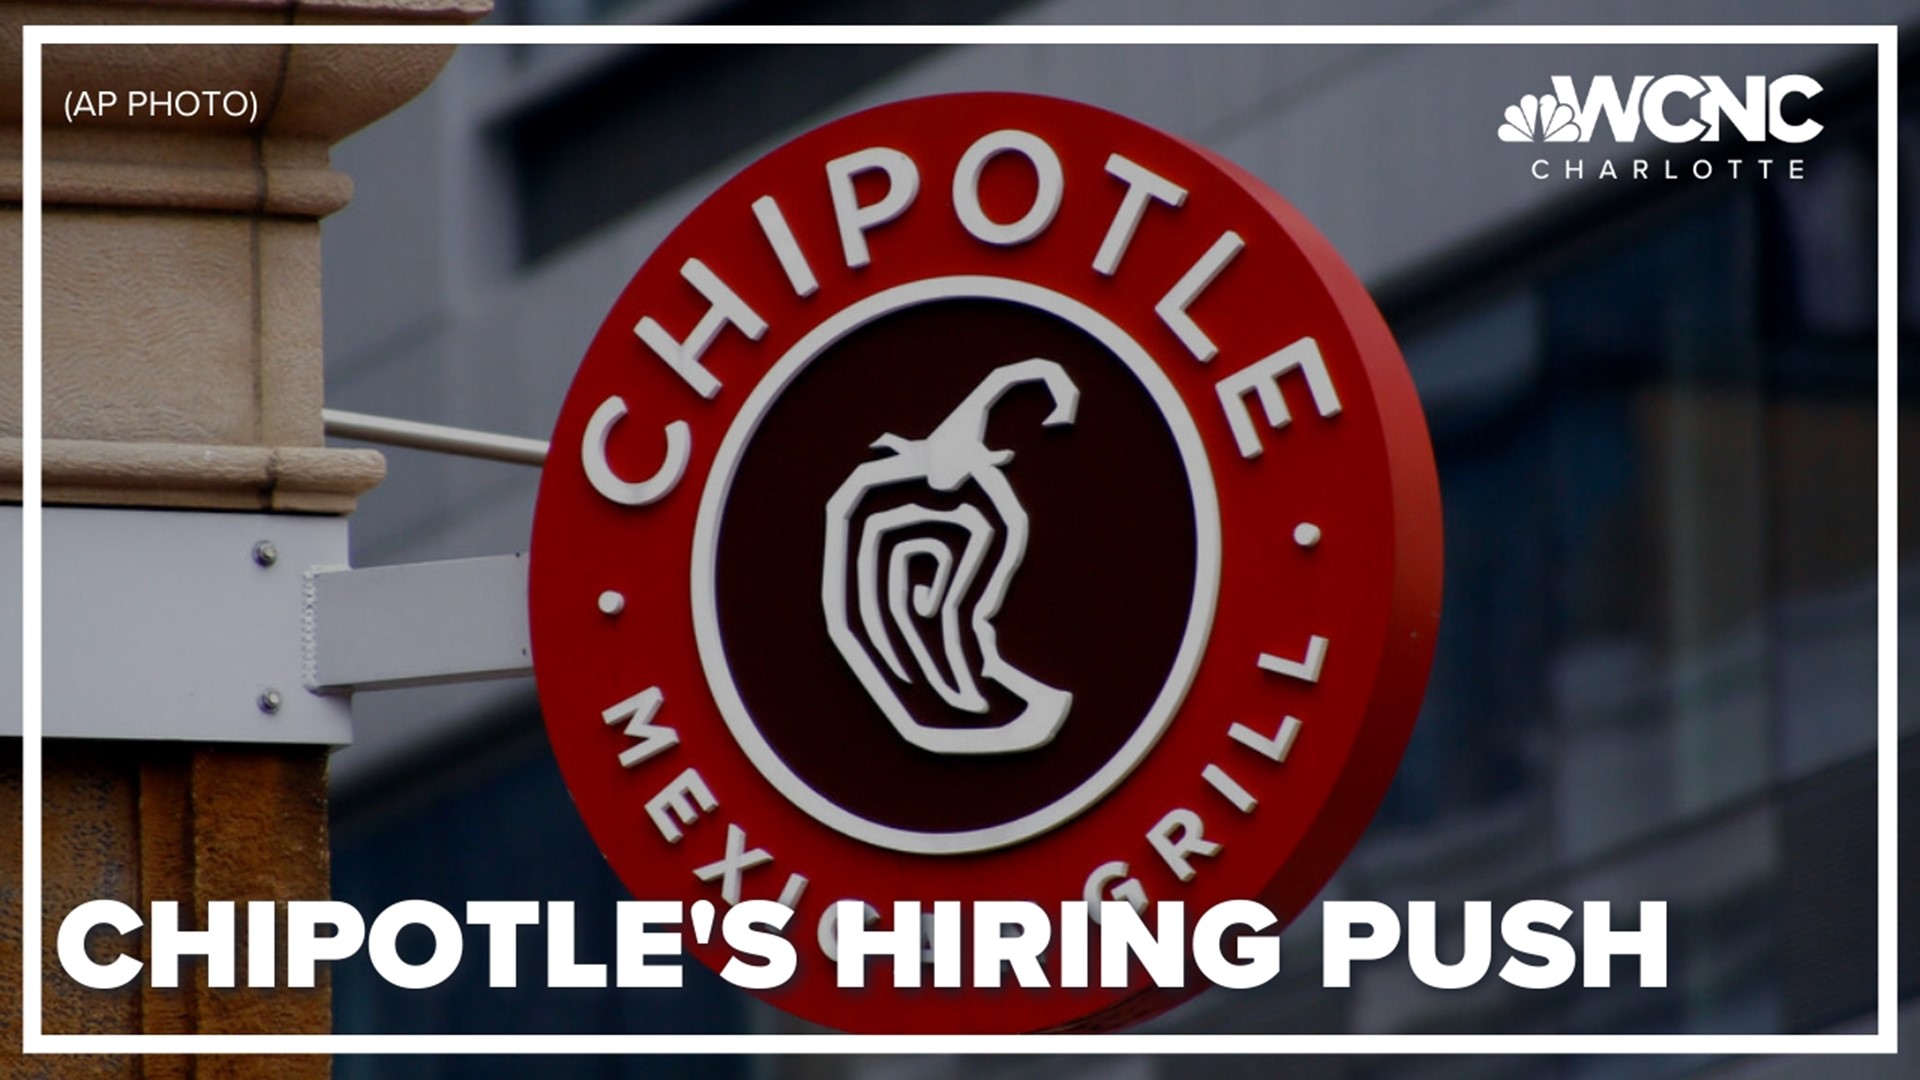 We're just a month away from what Chipotle calls "burrito season."